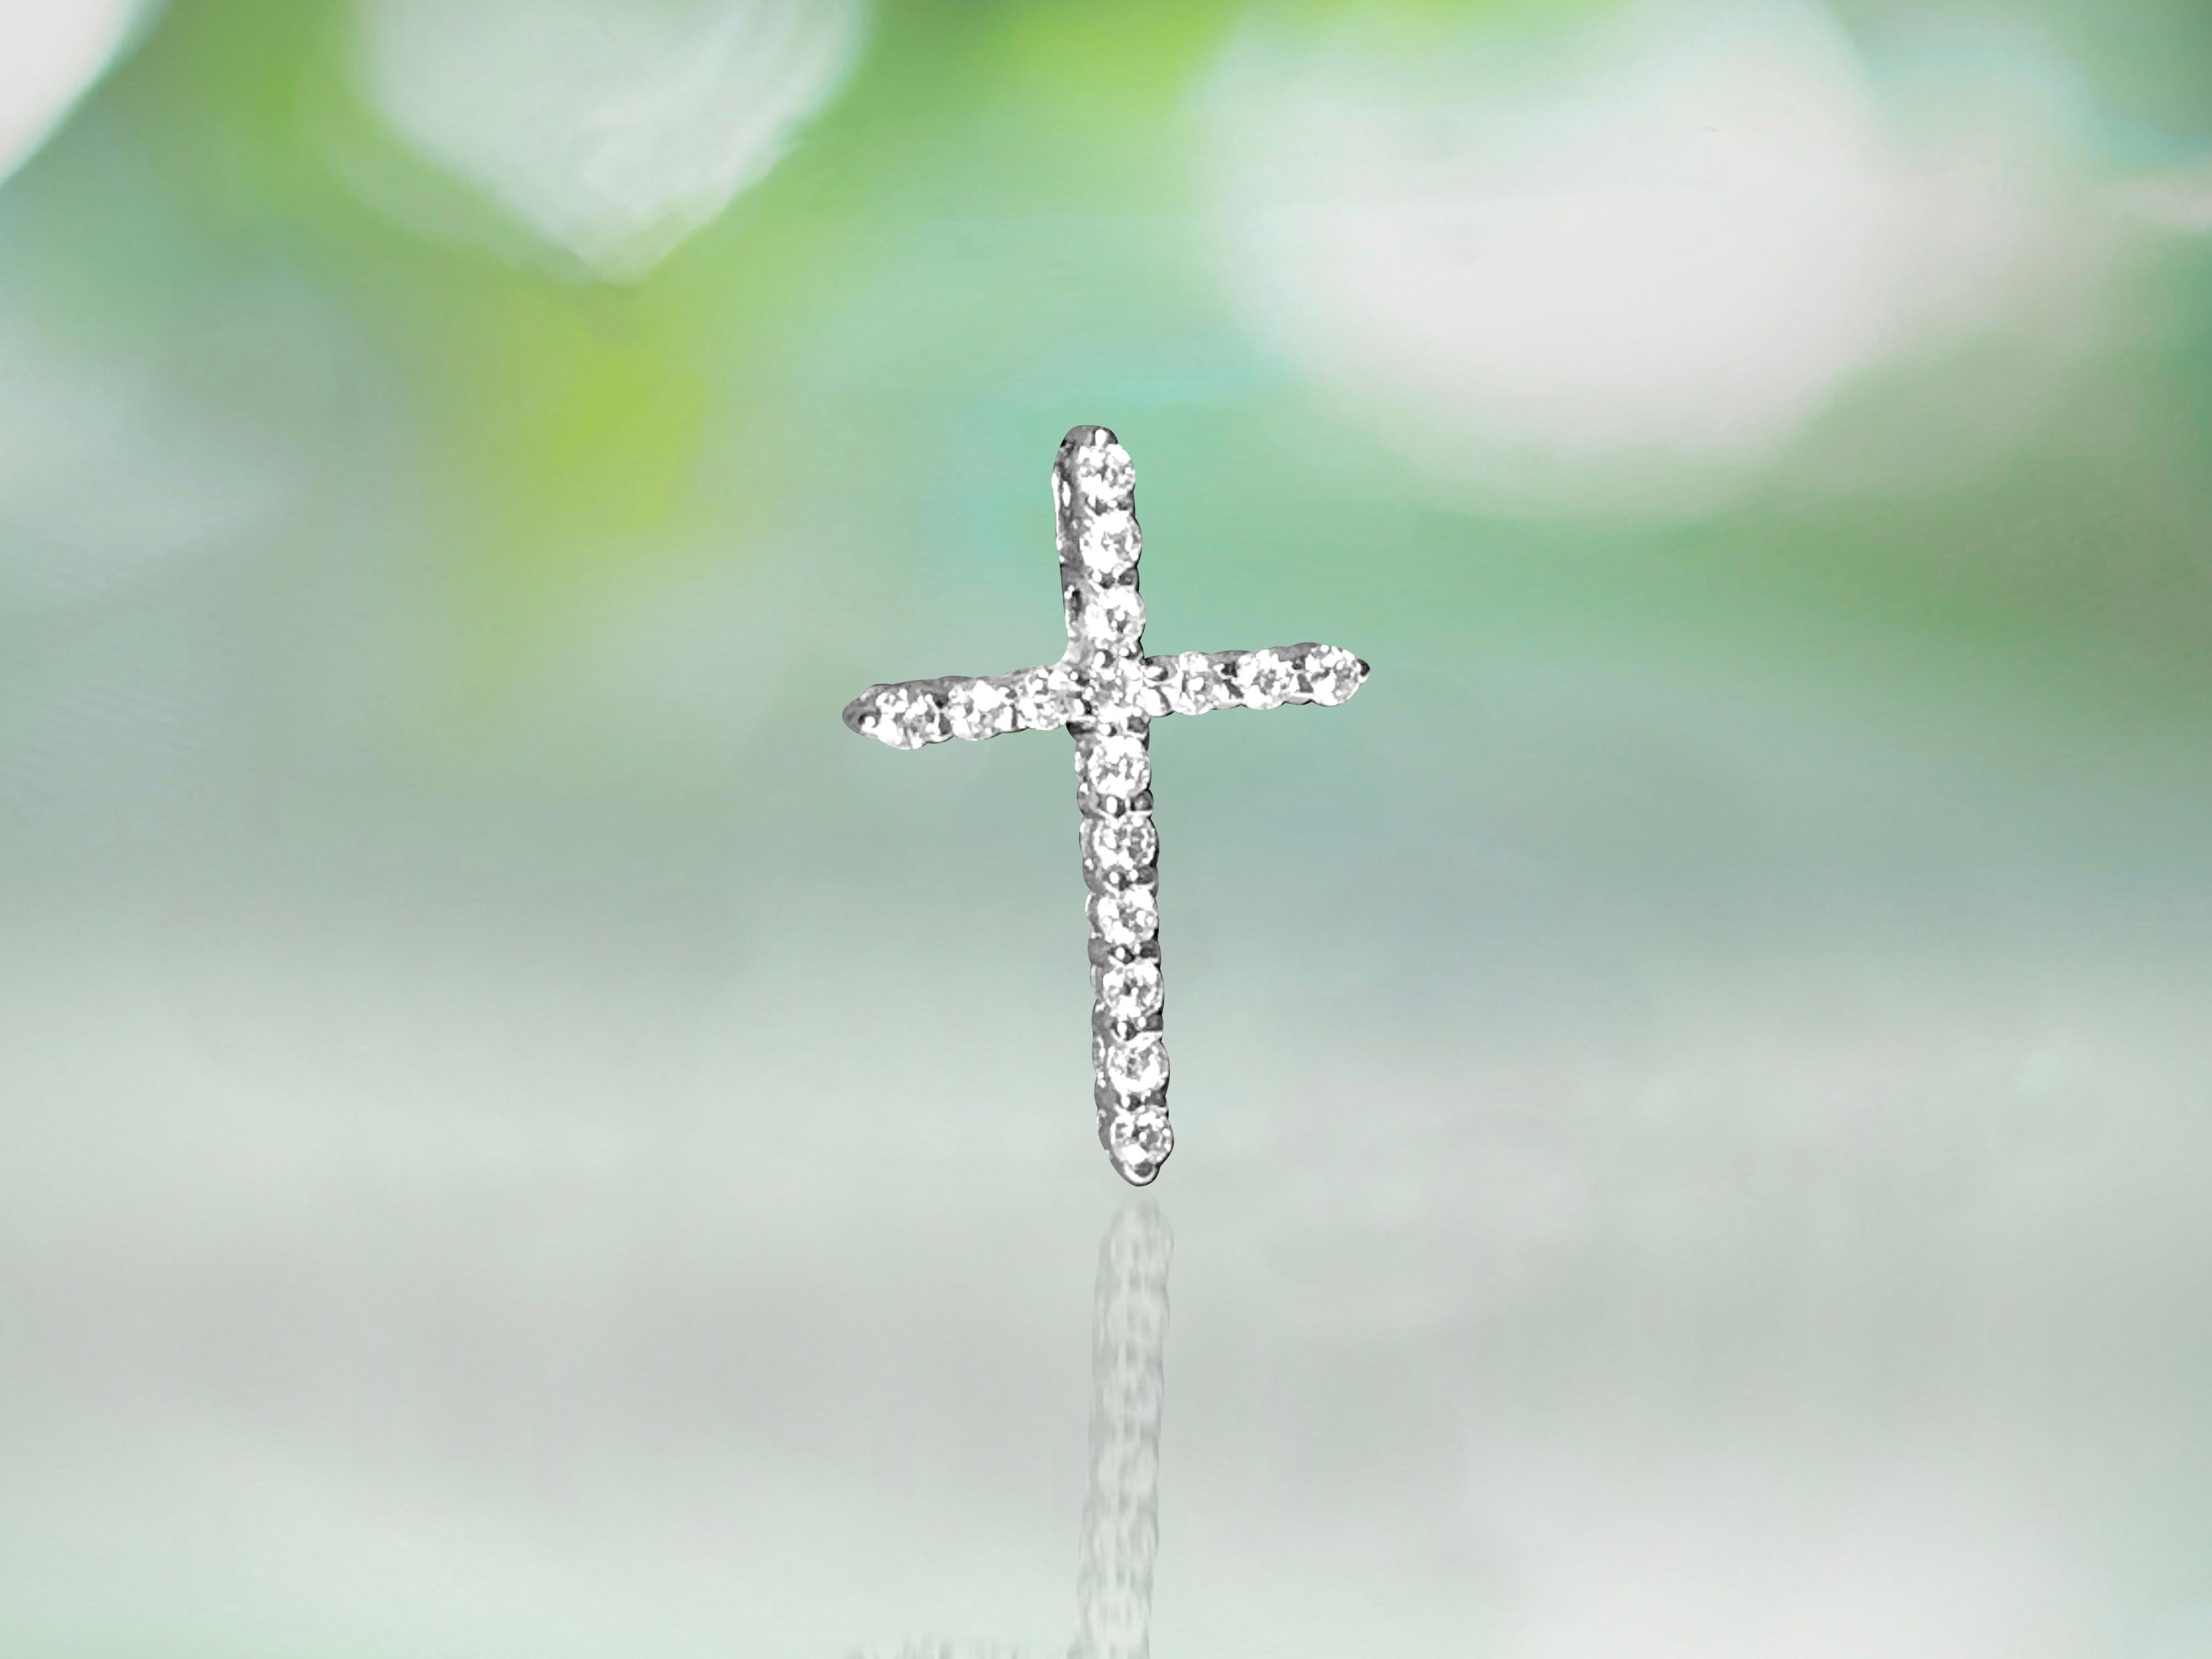 This stunning unisex religious cross pendant features a total of 0.55 carats of round brilliant cut diamonds, set in prongs for maximum brilliance and security. With VS2-SI1 clarity and G color, these diamonds sparkle with exceptional clarity and